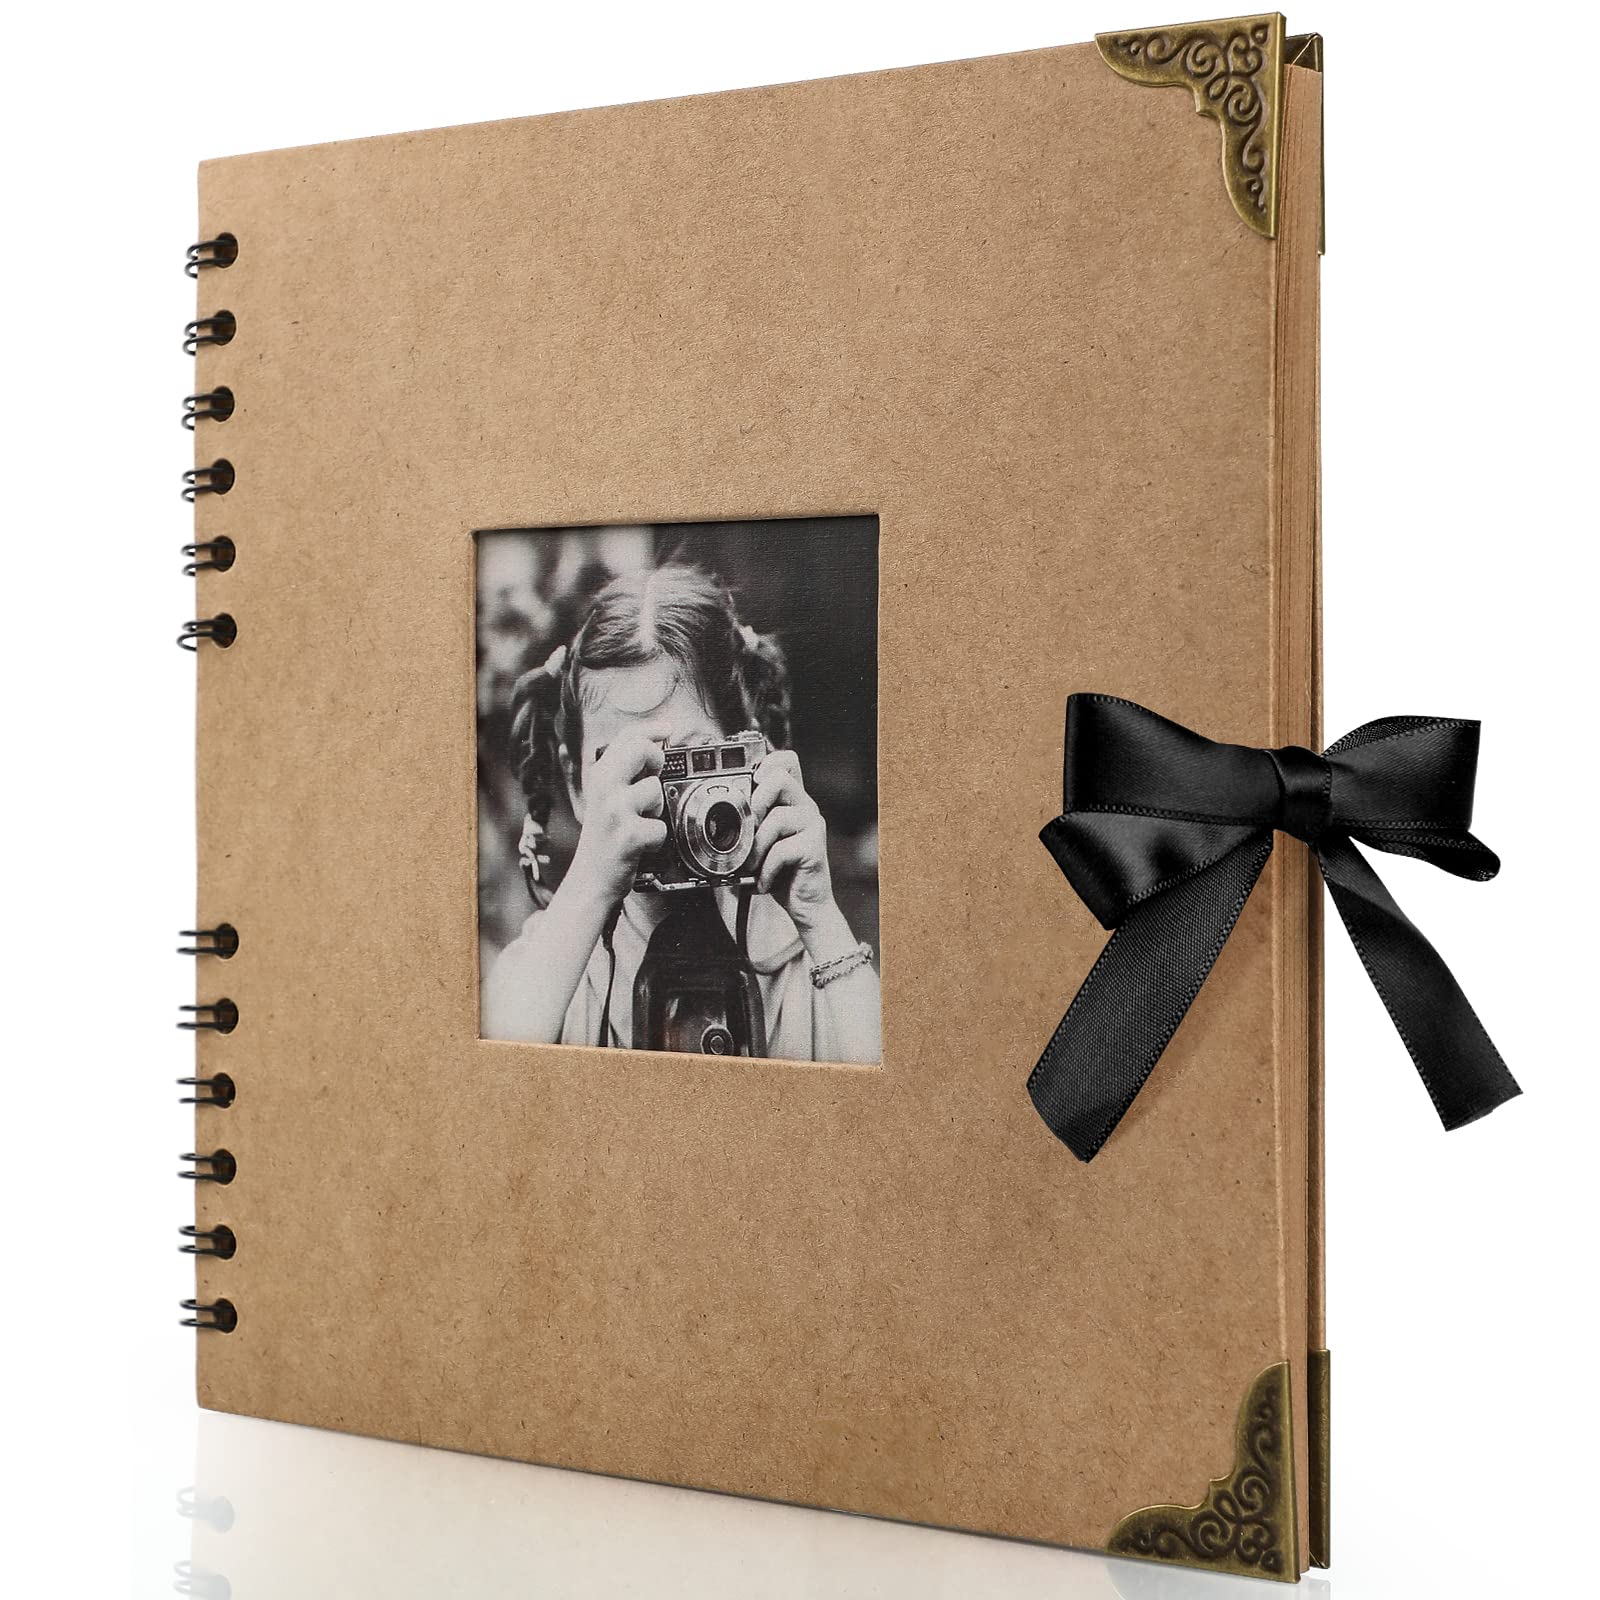 Jumbo Hard Cover All-In-One Combination Photo Album and Scrapbook